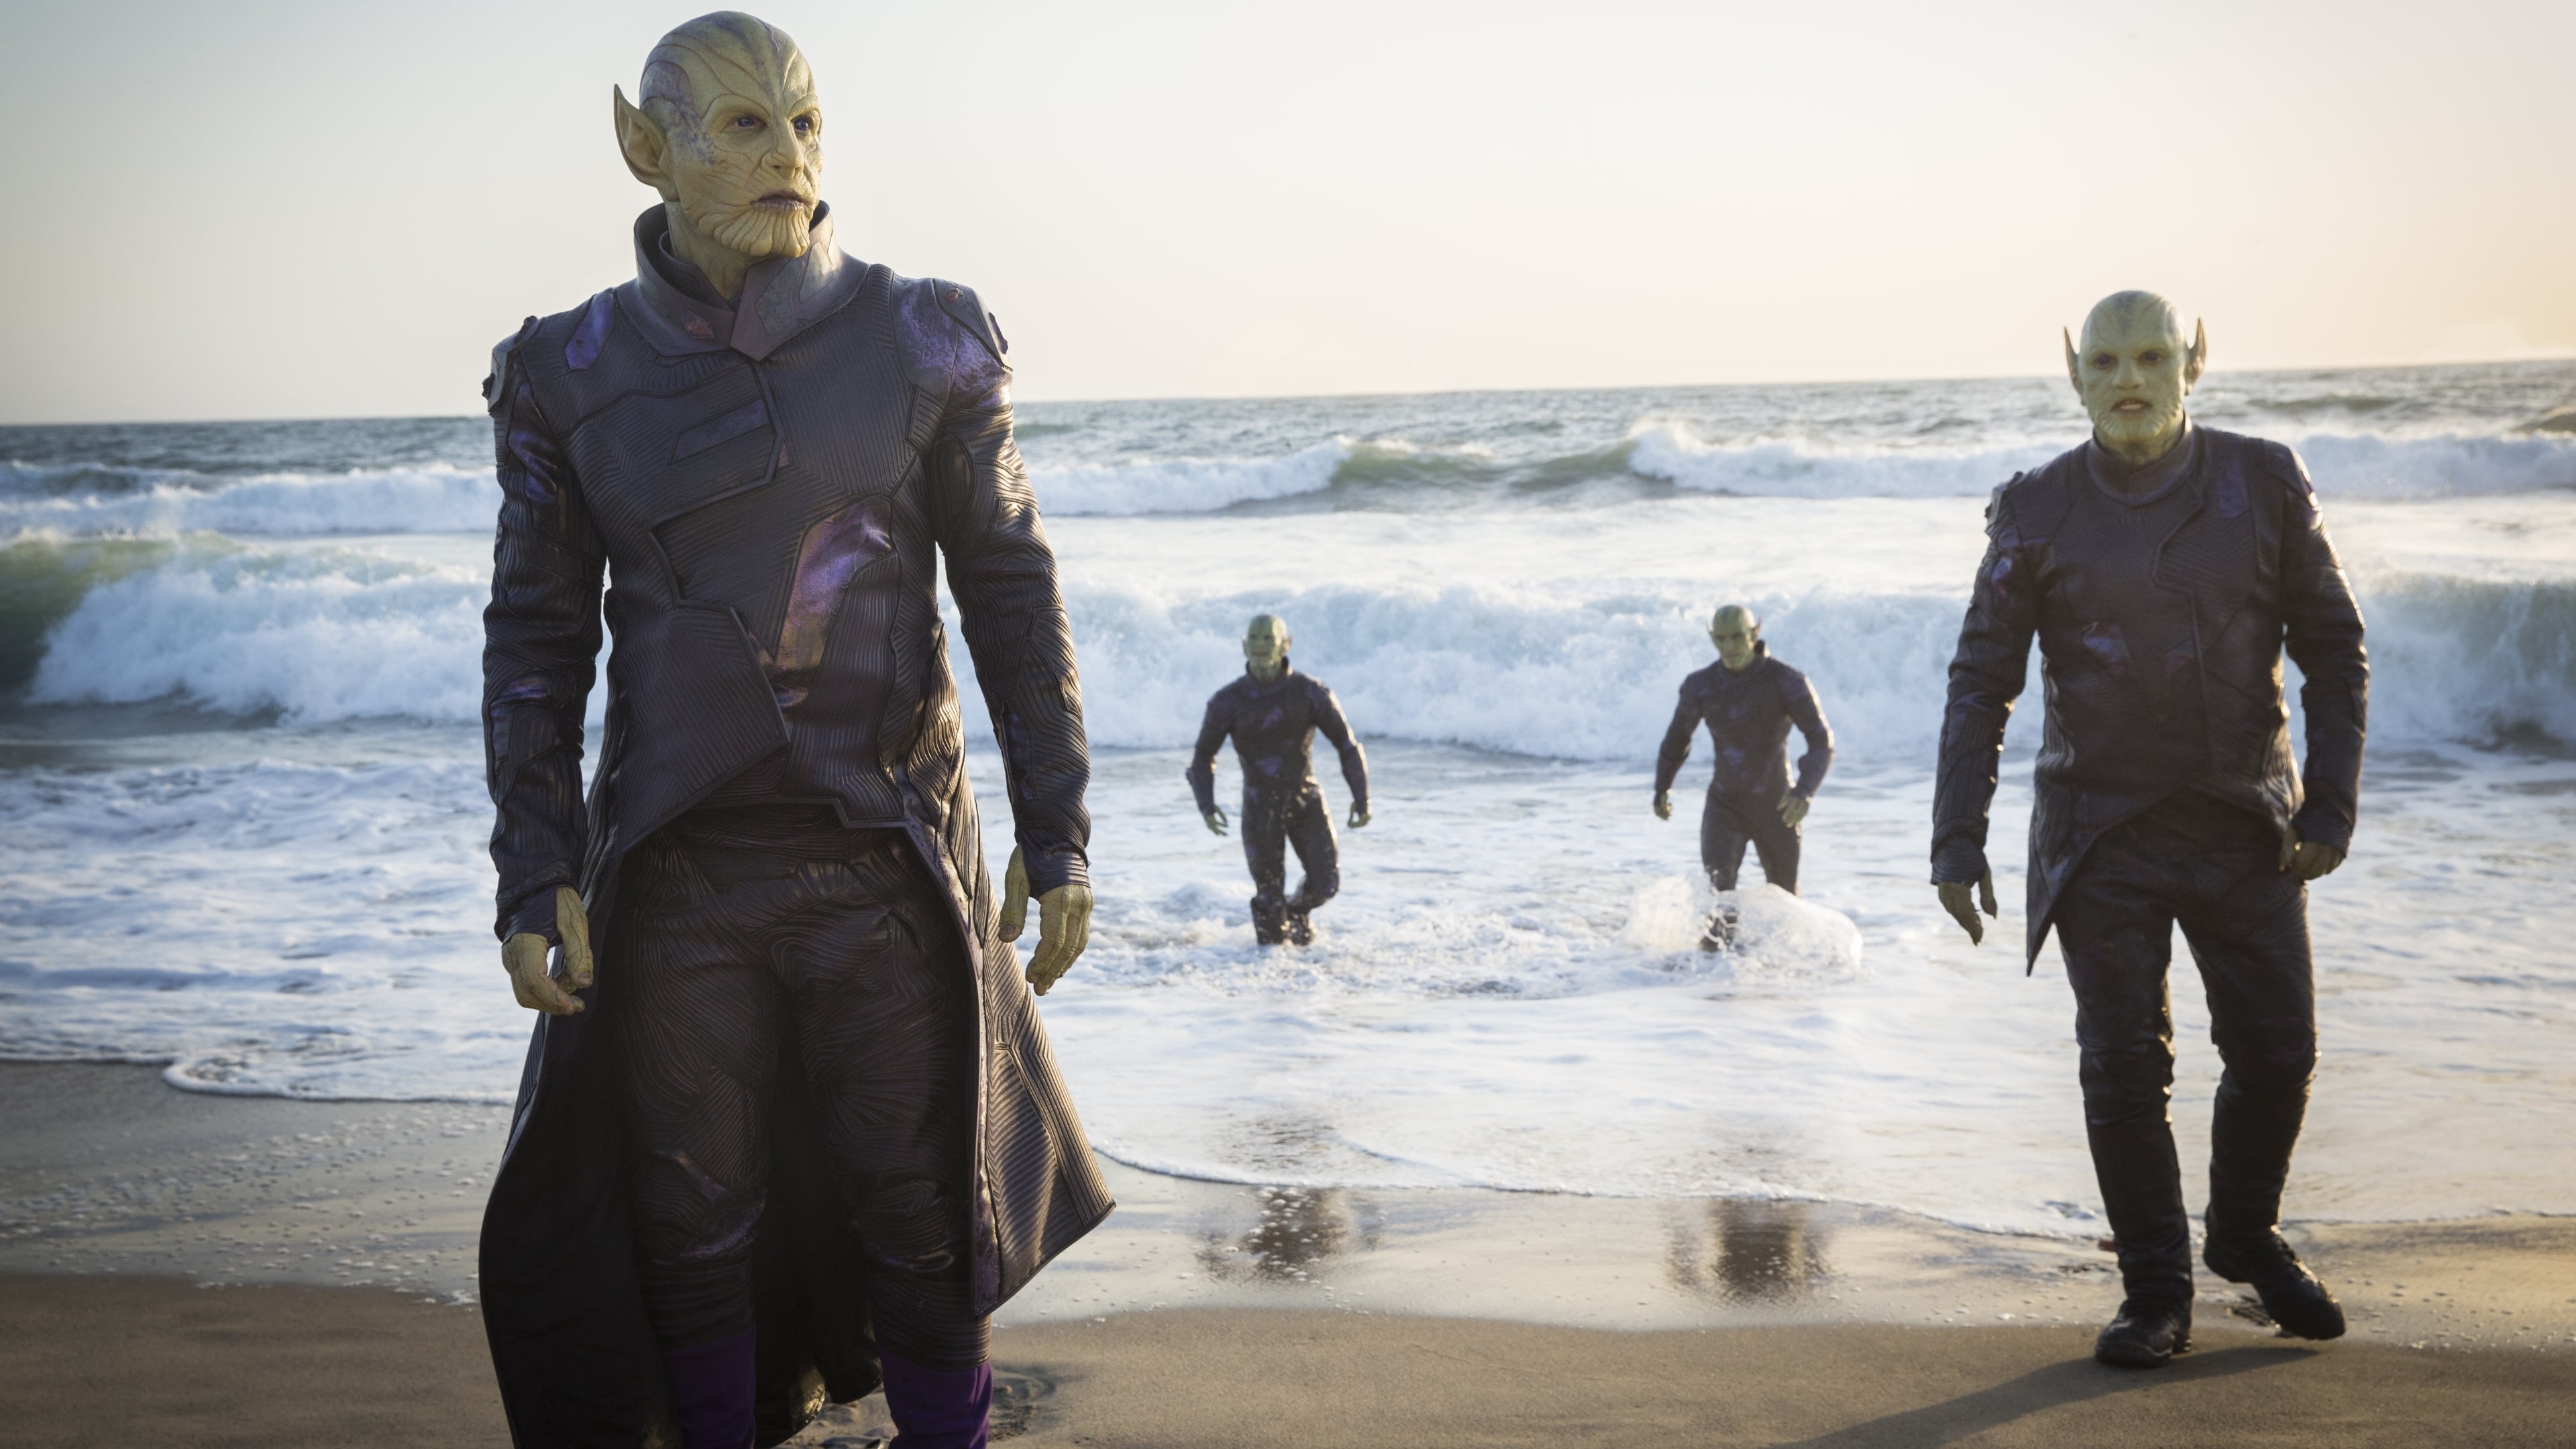 Skrulls were first introduced to Marvel fans in the Captain Marvel movie.